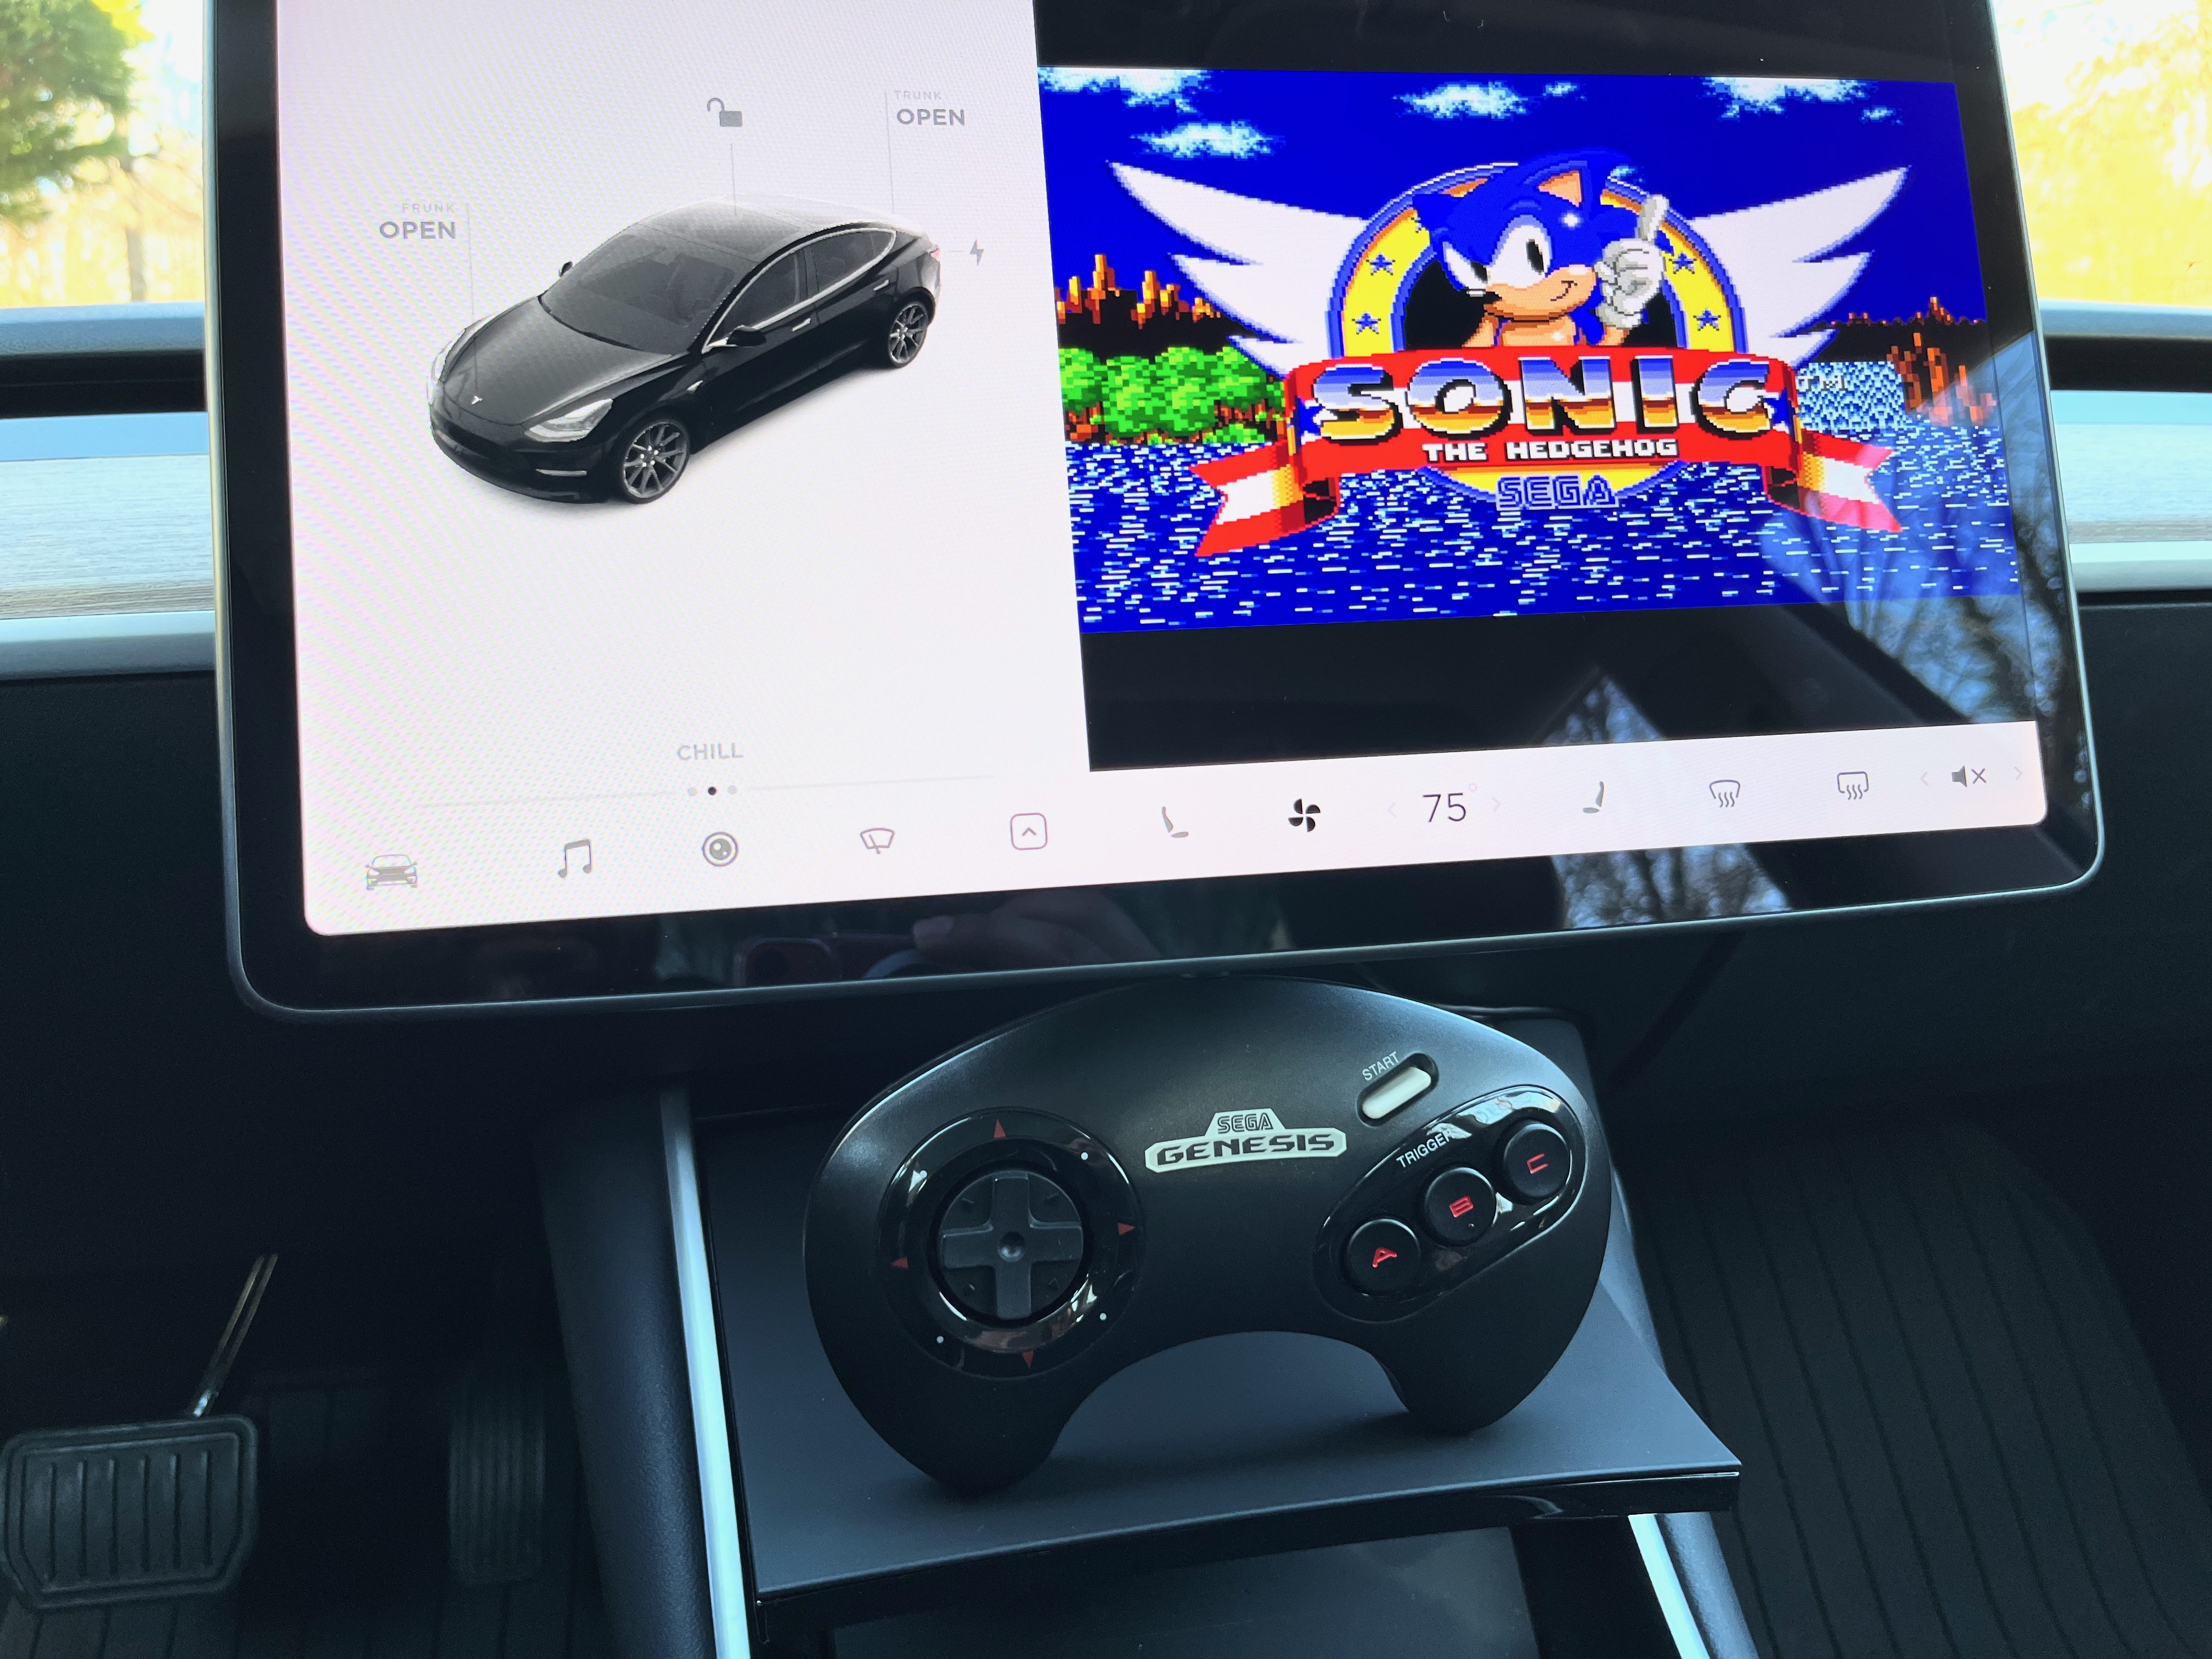 The Tesla Model 3 interior is displayed with a Sega Genesis game controller sitting under the infotainment screen with a window on the screen showing the game Sonic 1.